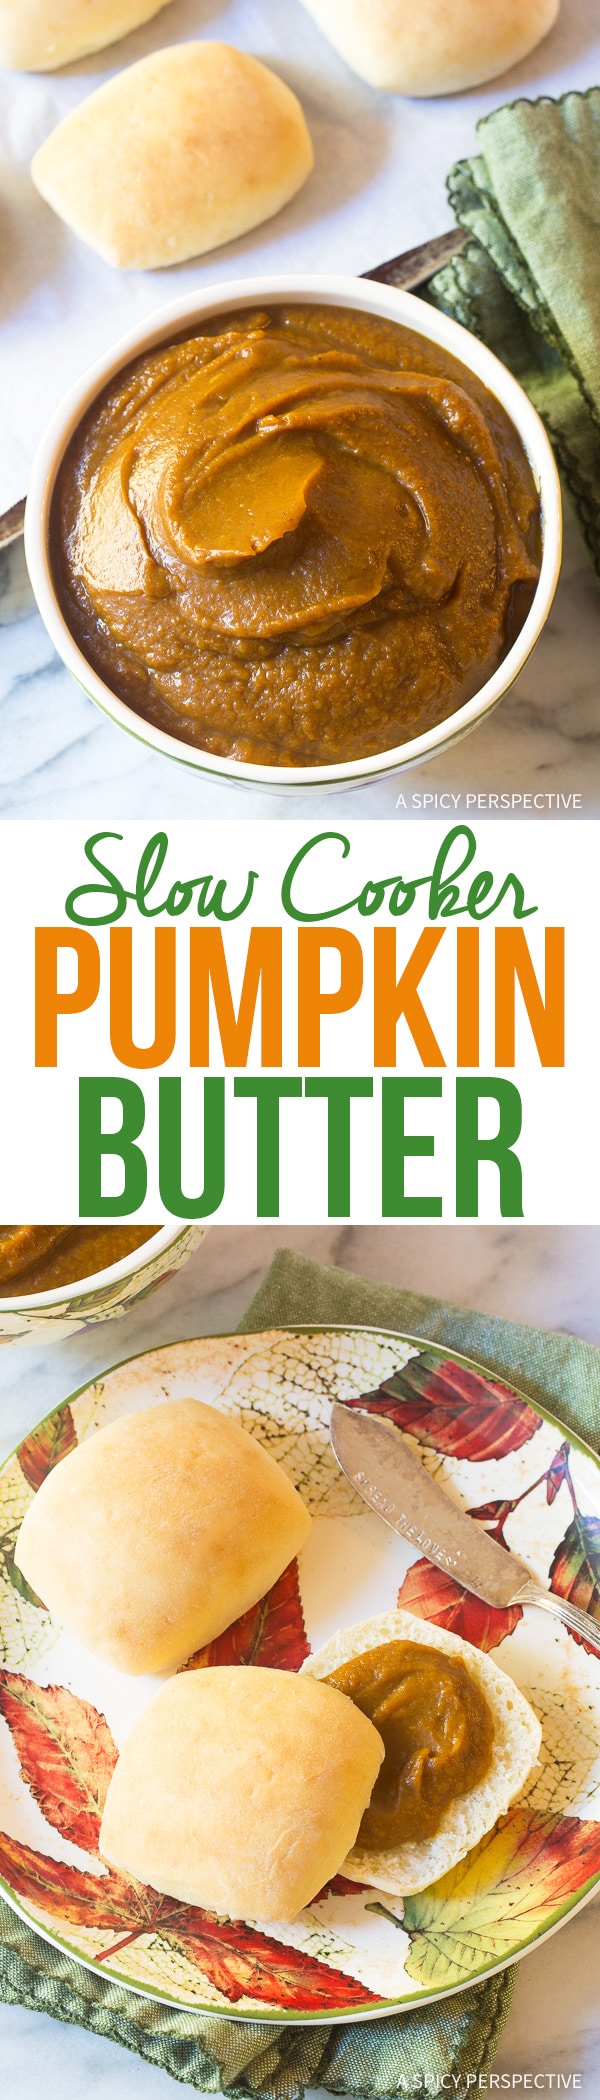 Slow Cooker Pumpkin Butter Recipe for the Holidays!